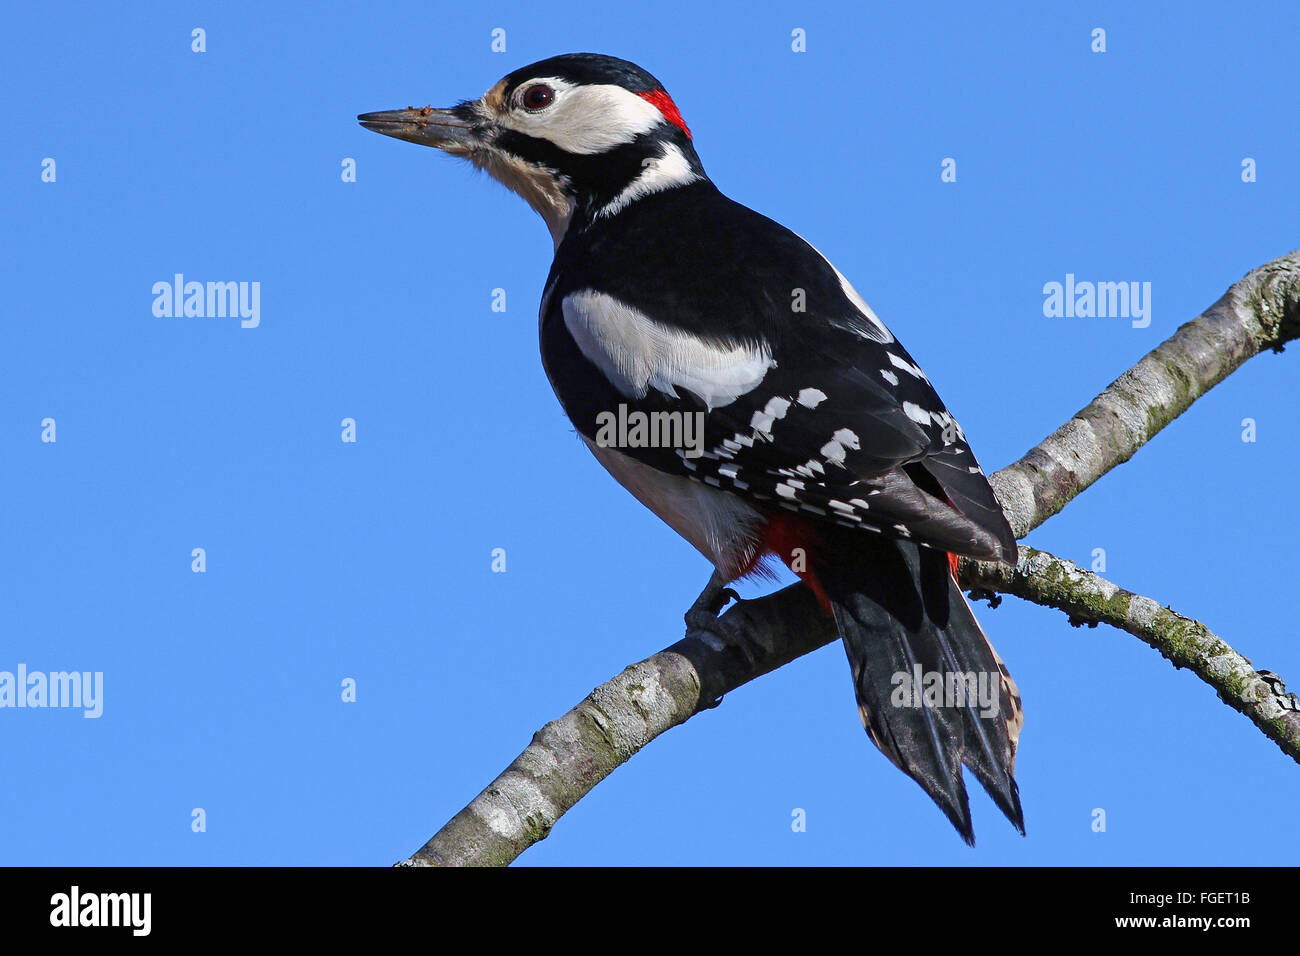 Great spotted woodpecker / Colorful birds Stock Photo